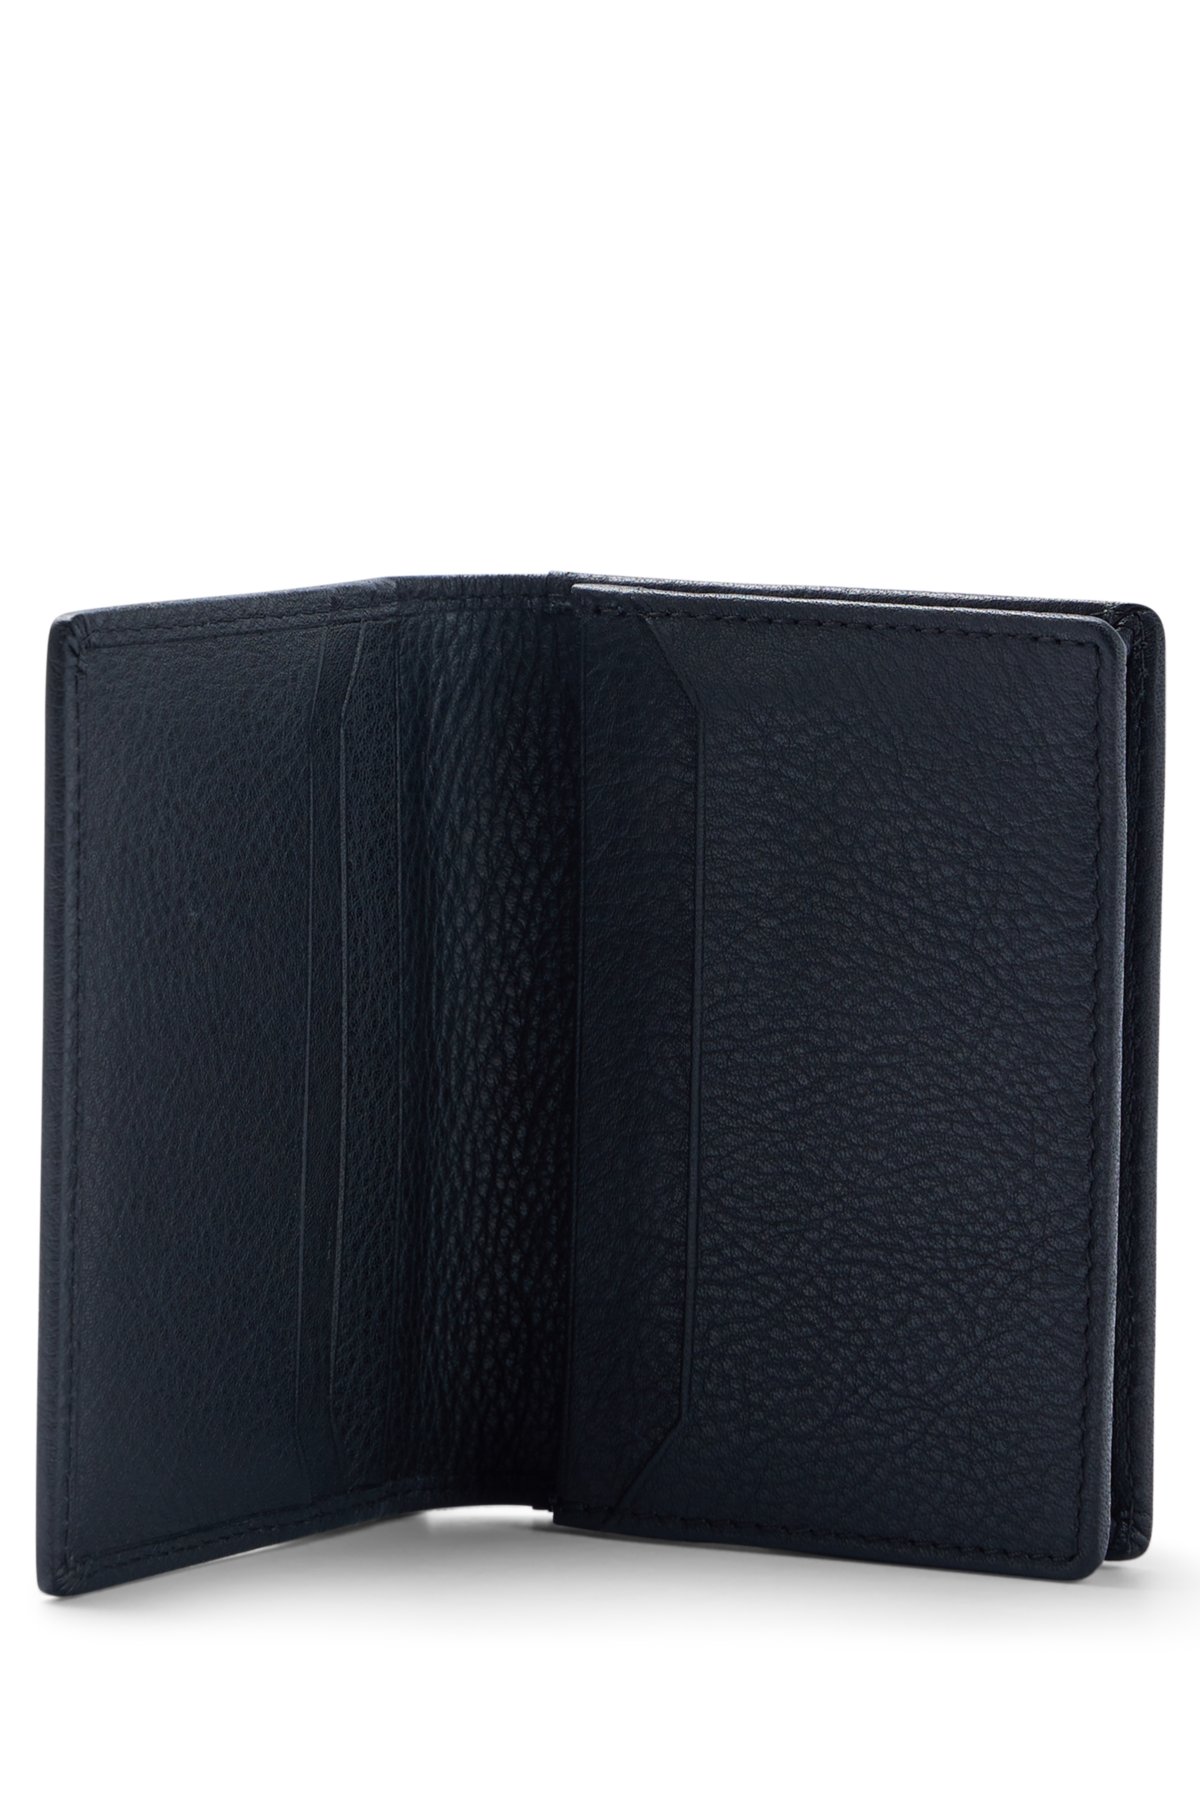 Grained-leather folding card holder with metallic logo, Black